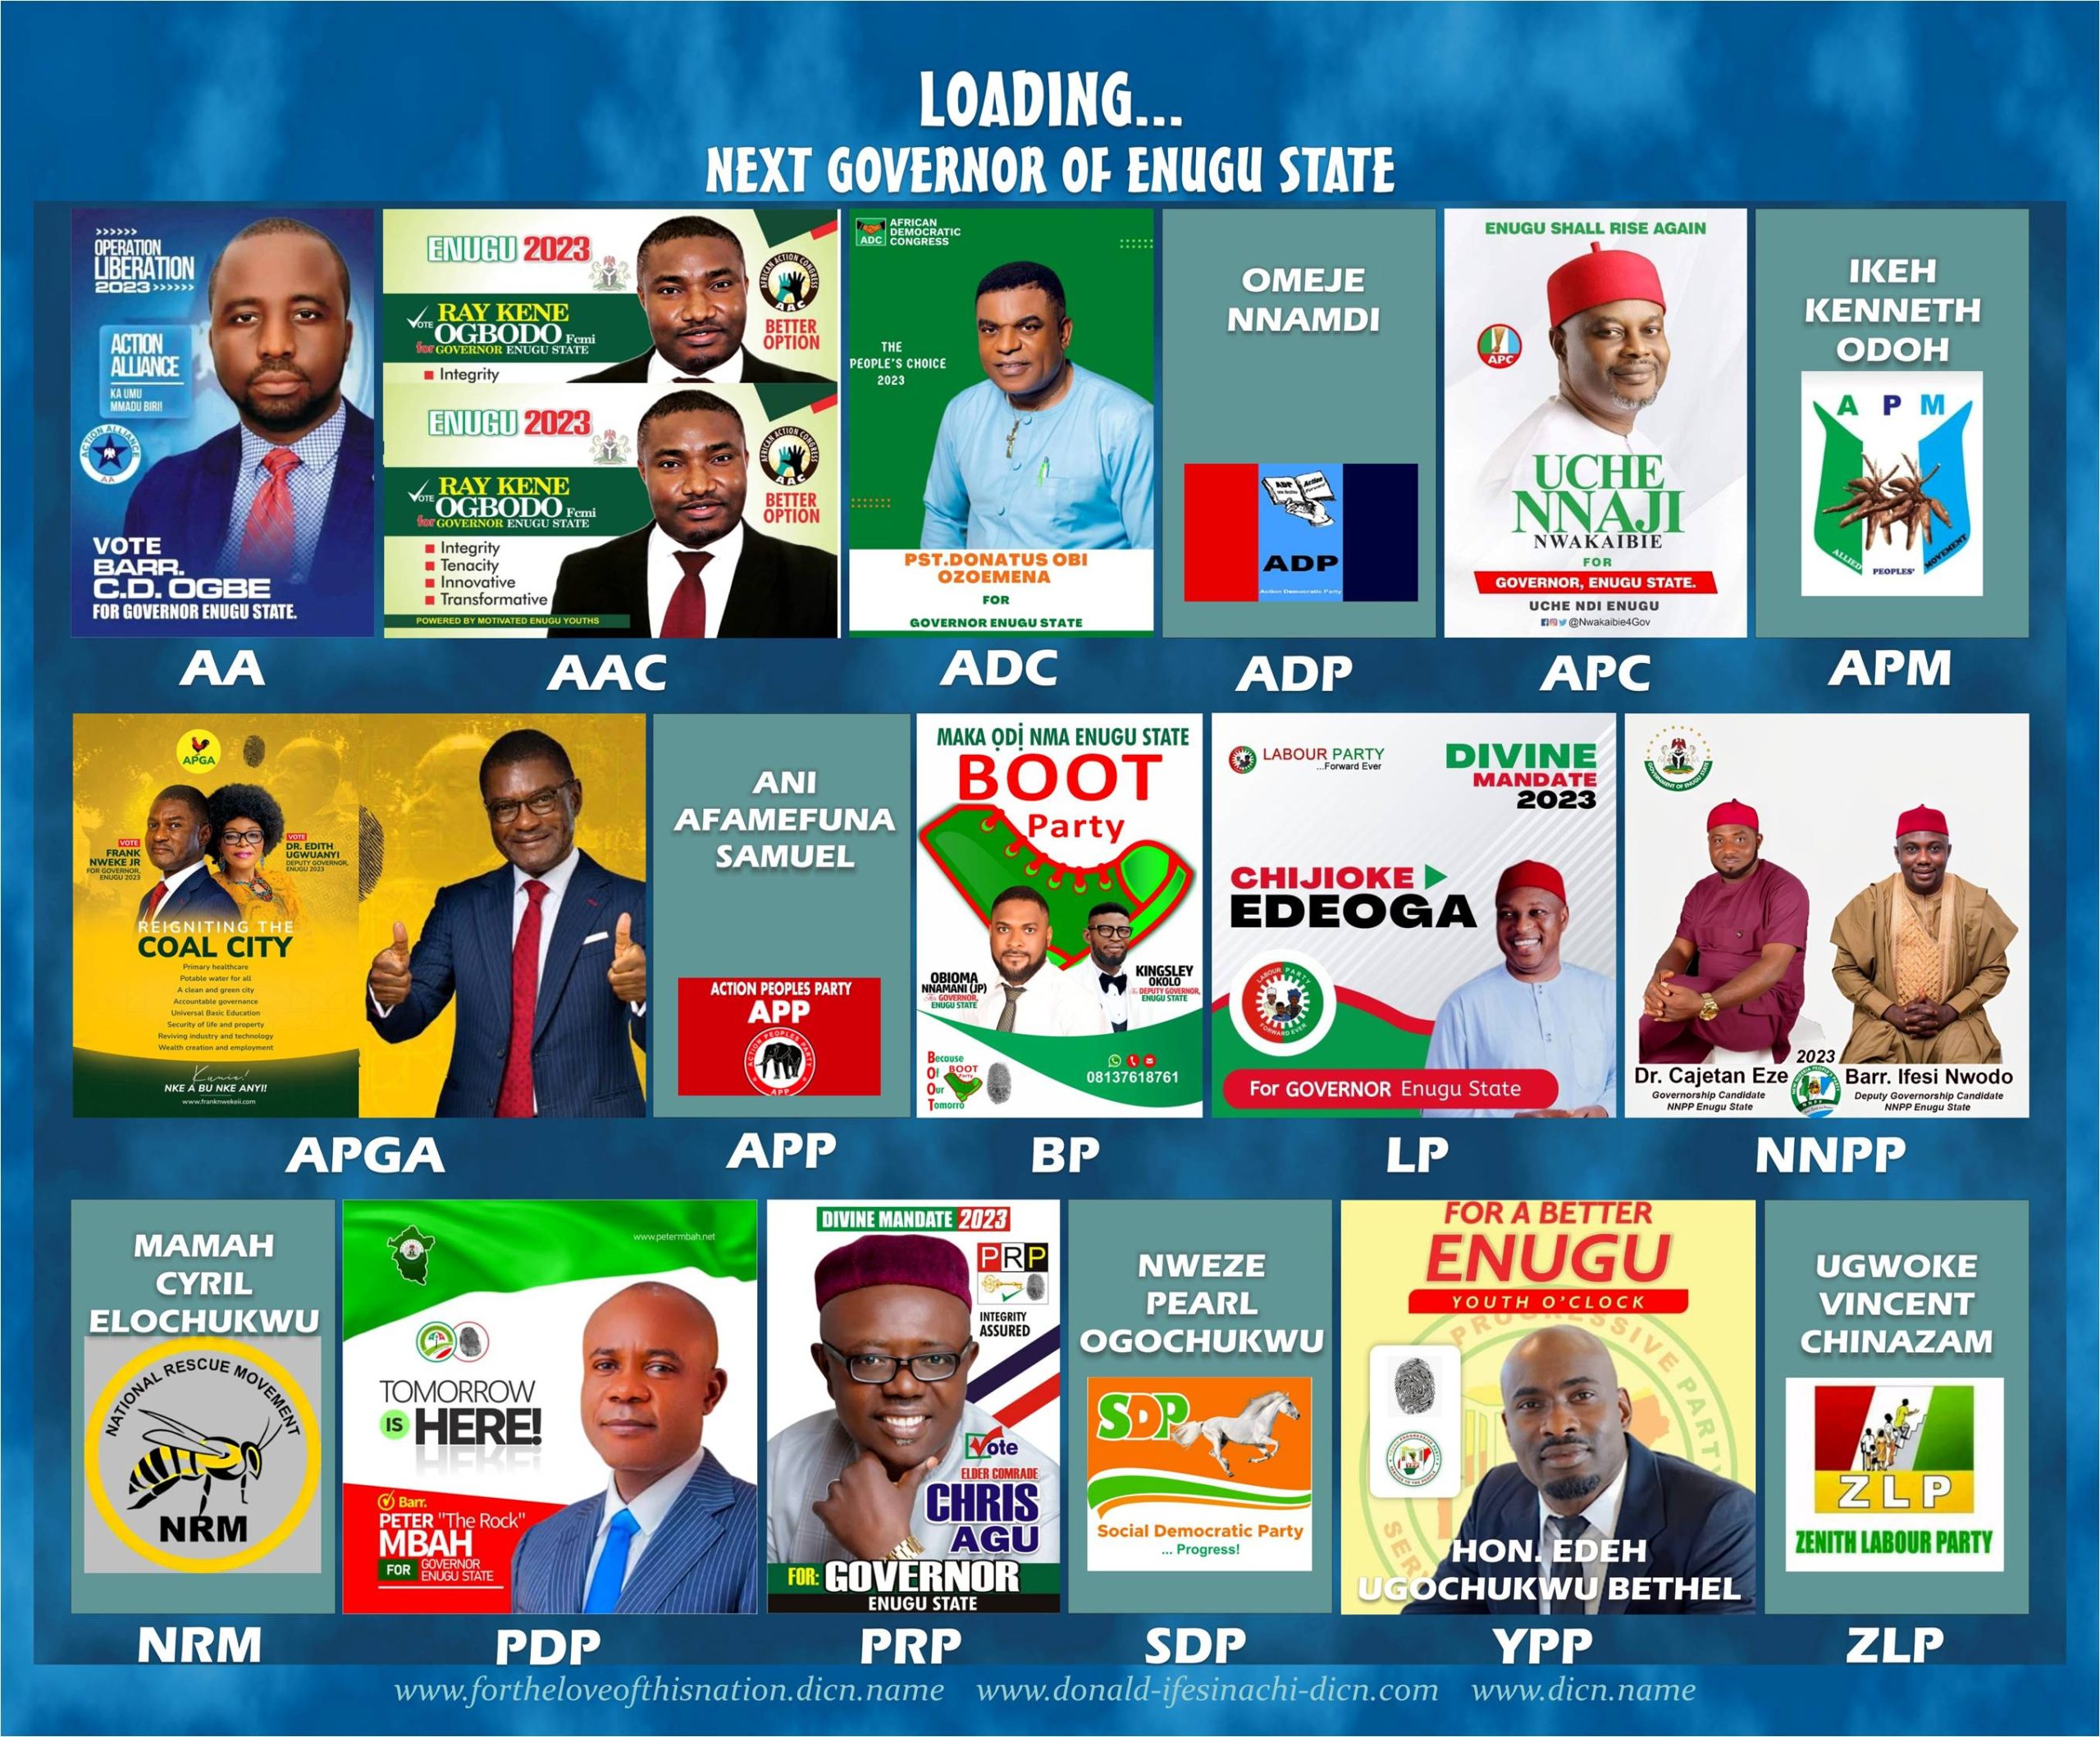 Loading… Next Set Of Nigerian Governors- Enugu State In Focus By Donald IfesinaChi (Dicn)